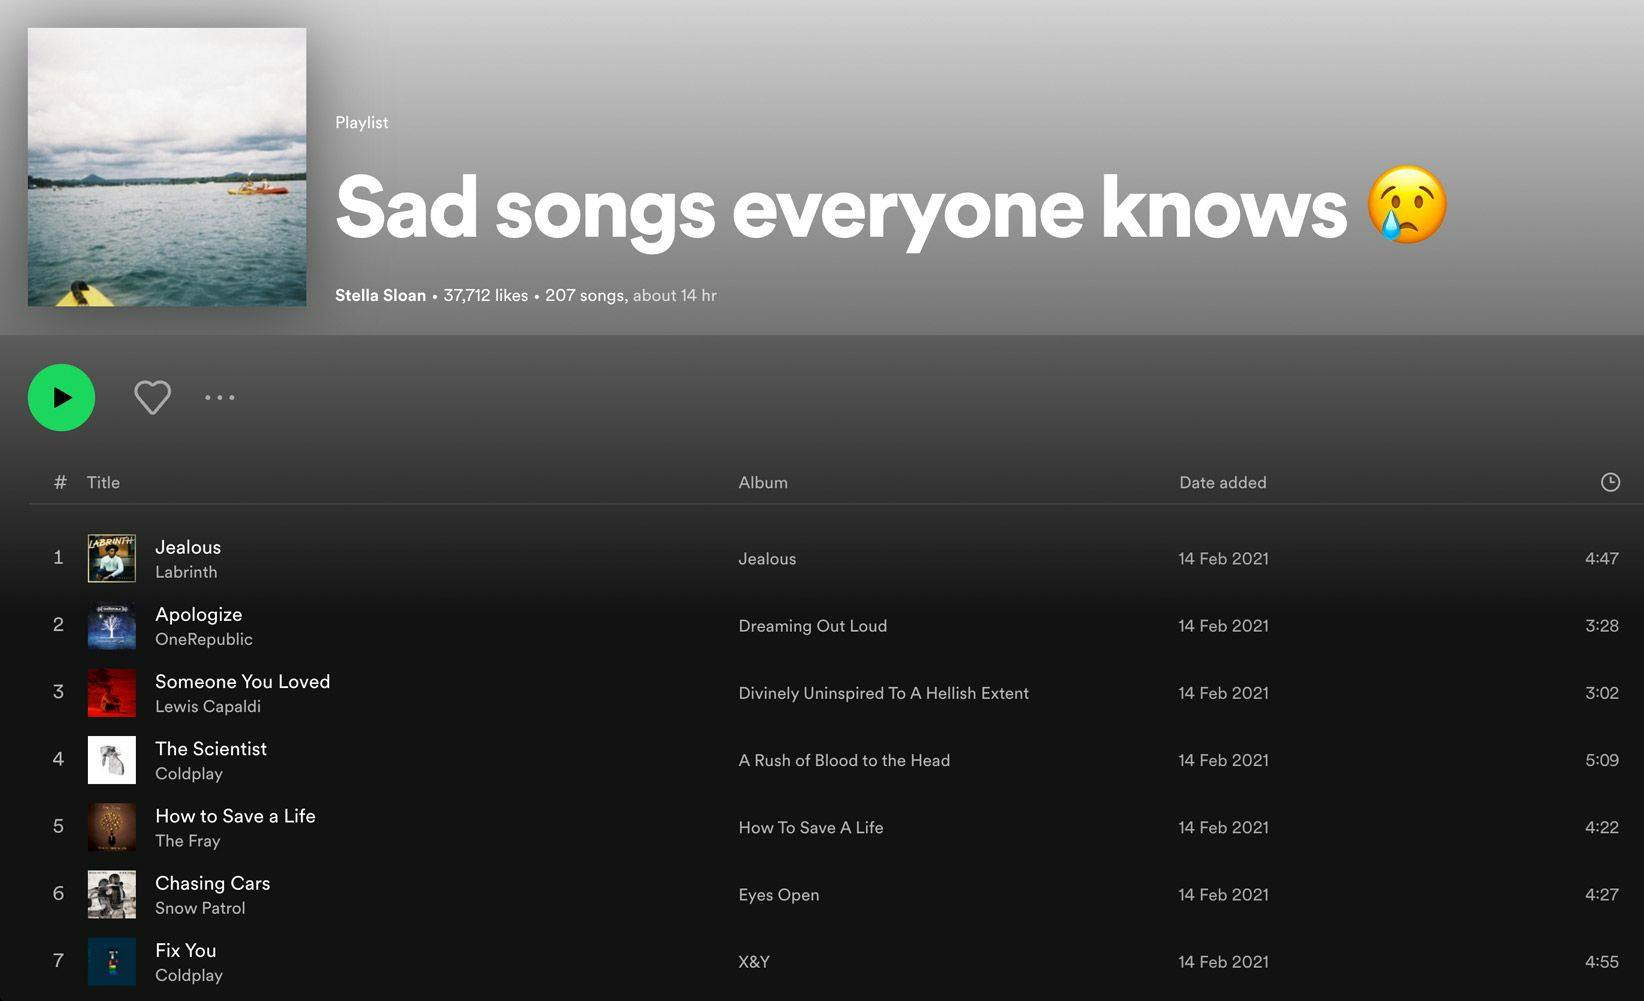 Spotify playlist titled "Sad songs everyone knows"